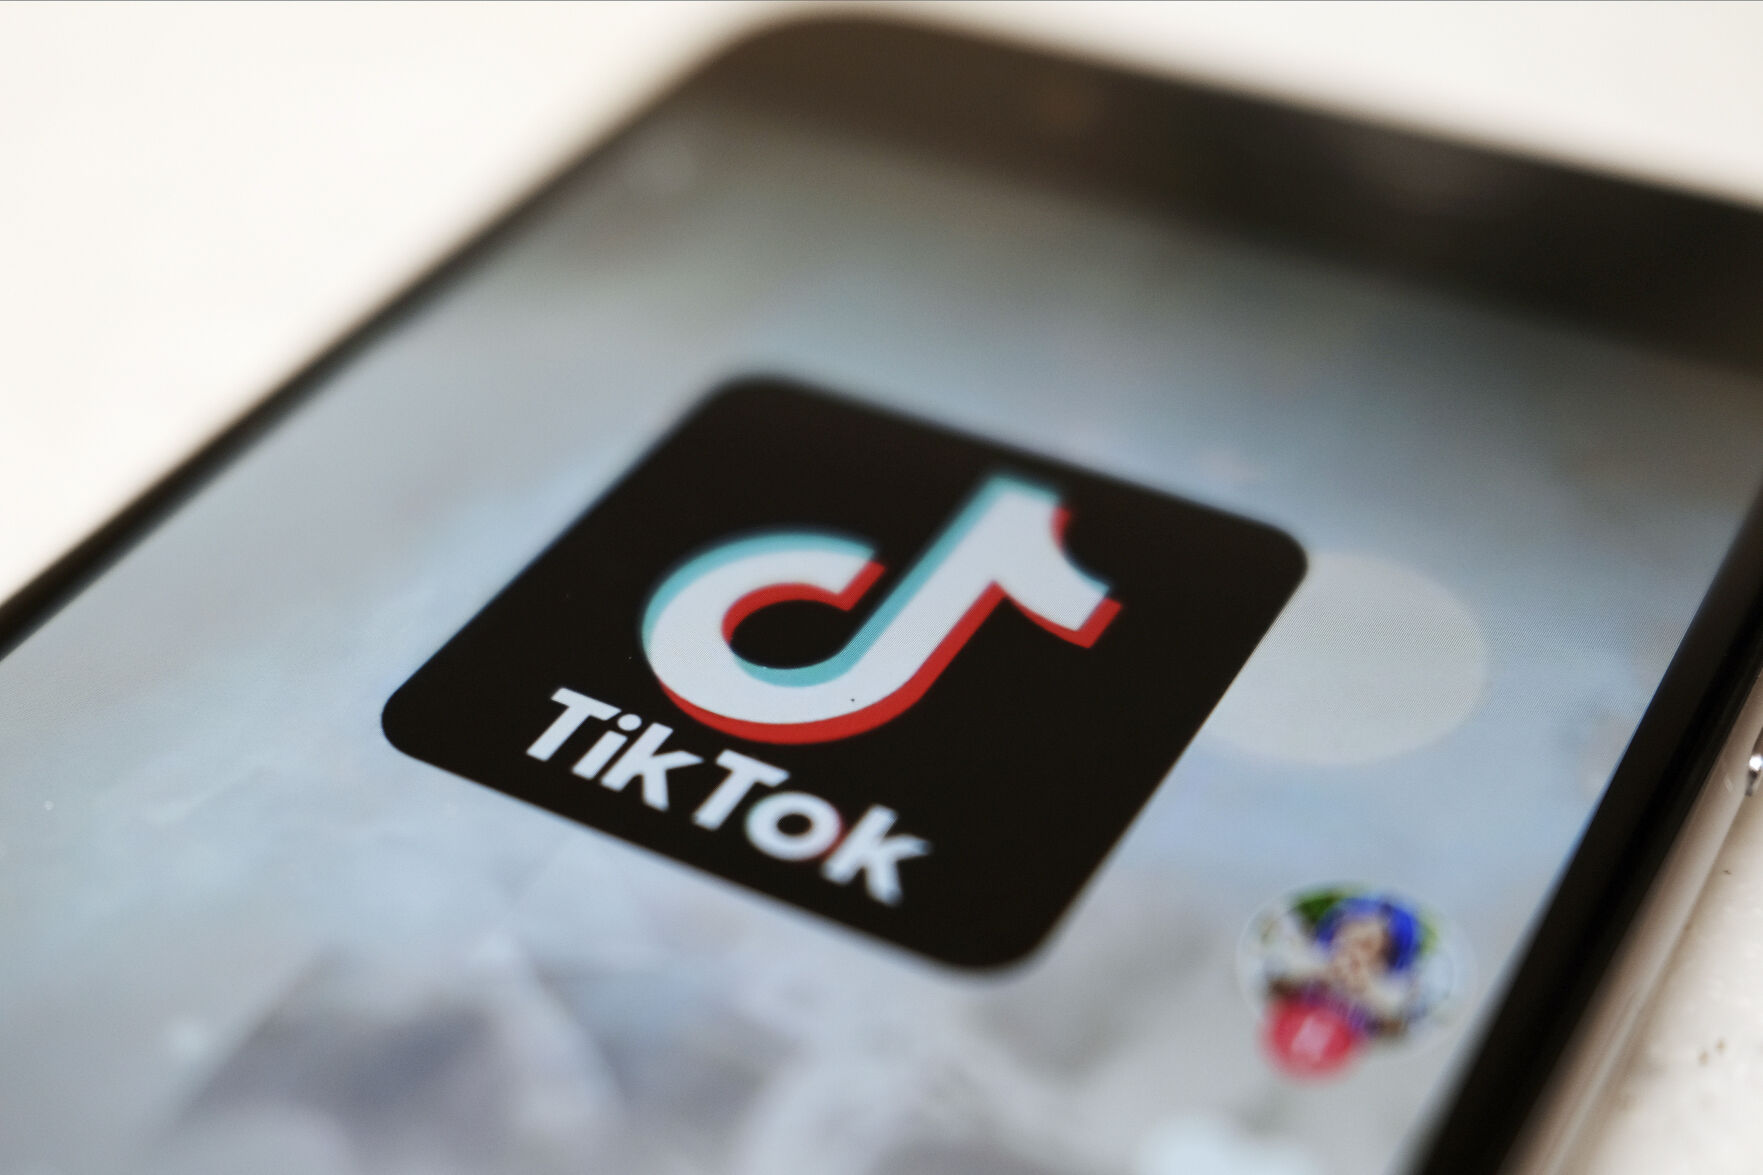 <p>FILE - The TikTok logo is displayed on a smartphone screen, Sept. 28, 2020, in Tokyo, Japan. The European Union is looking into whether TikTok has broken the bloc’s strict new digital rules for cleaning up social media and keeping internet users safe. (AP Photo/Kiichiro Sato, File)</p>   PHOTO CREDIT: Kiichiro Sato 